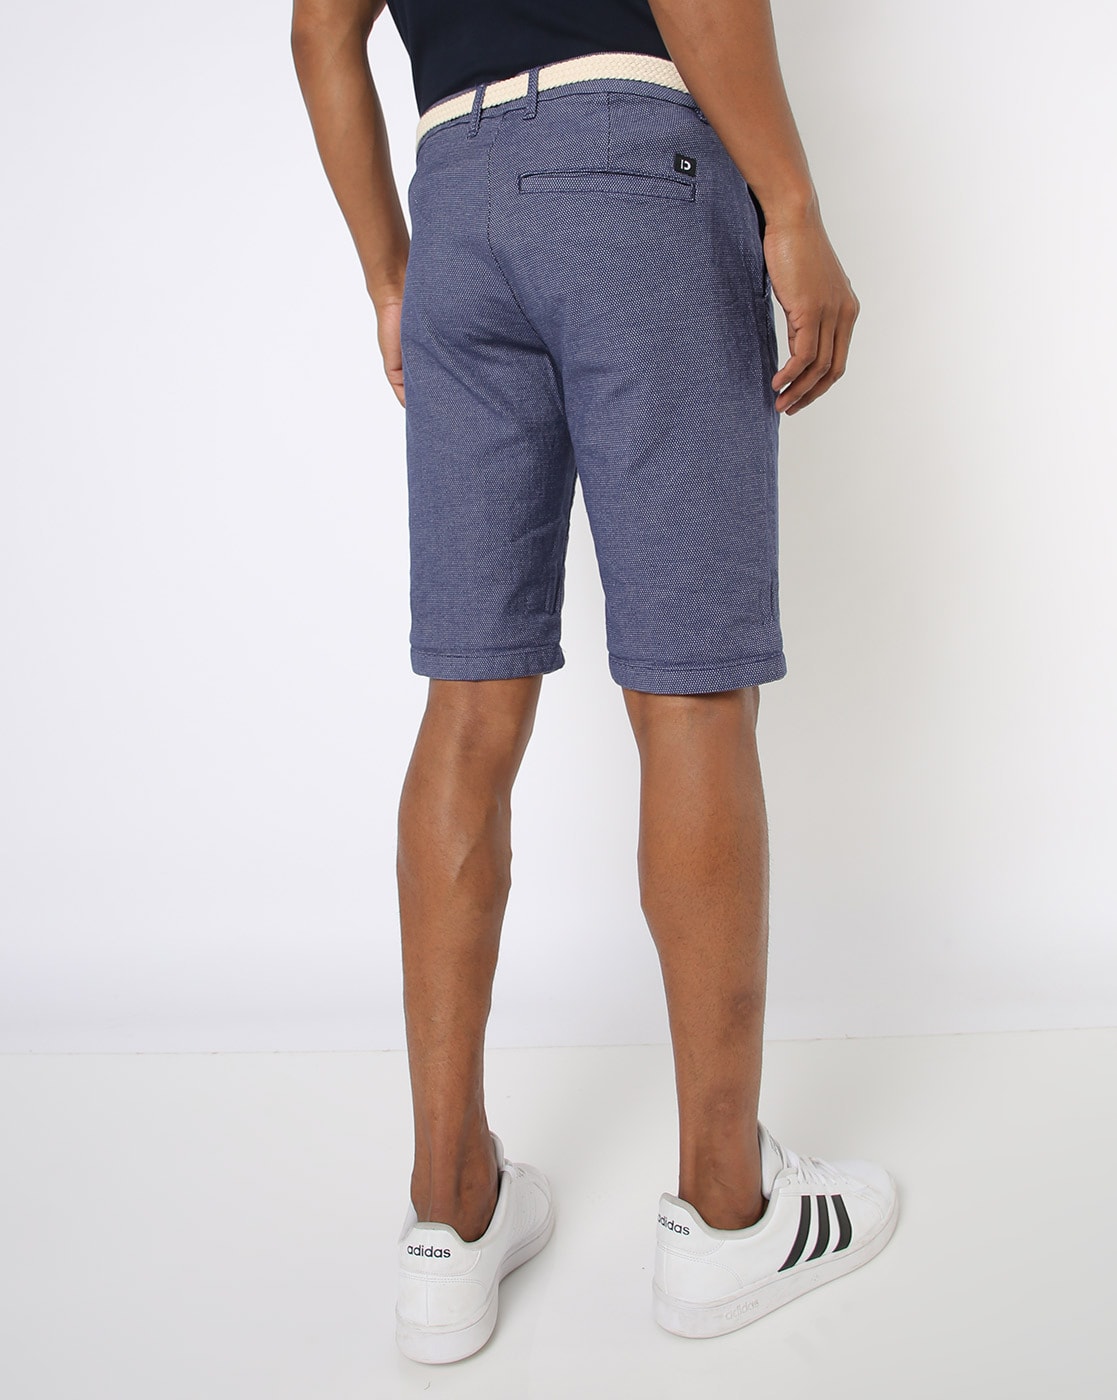 Buy Blue Shorts Men for Tailor Tom by 3/4ths & Online